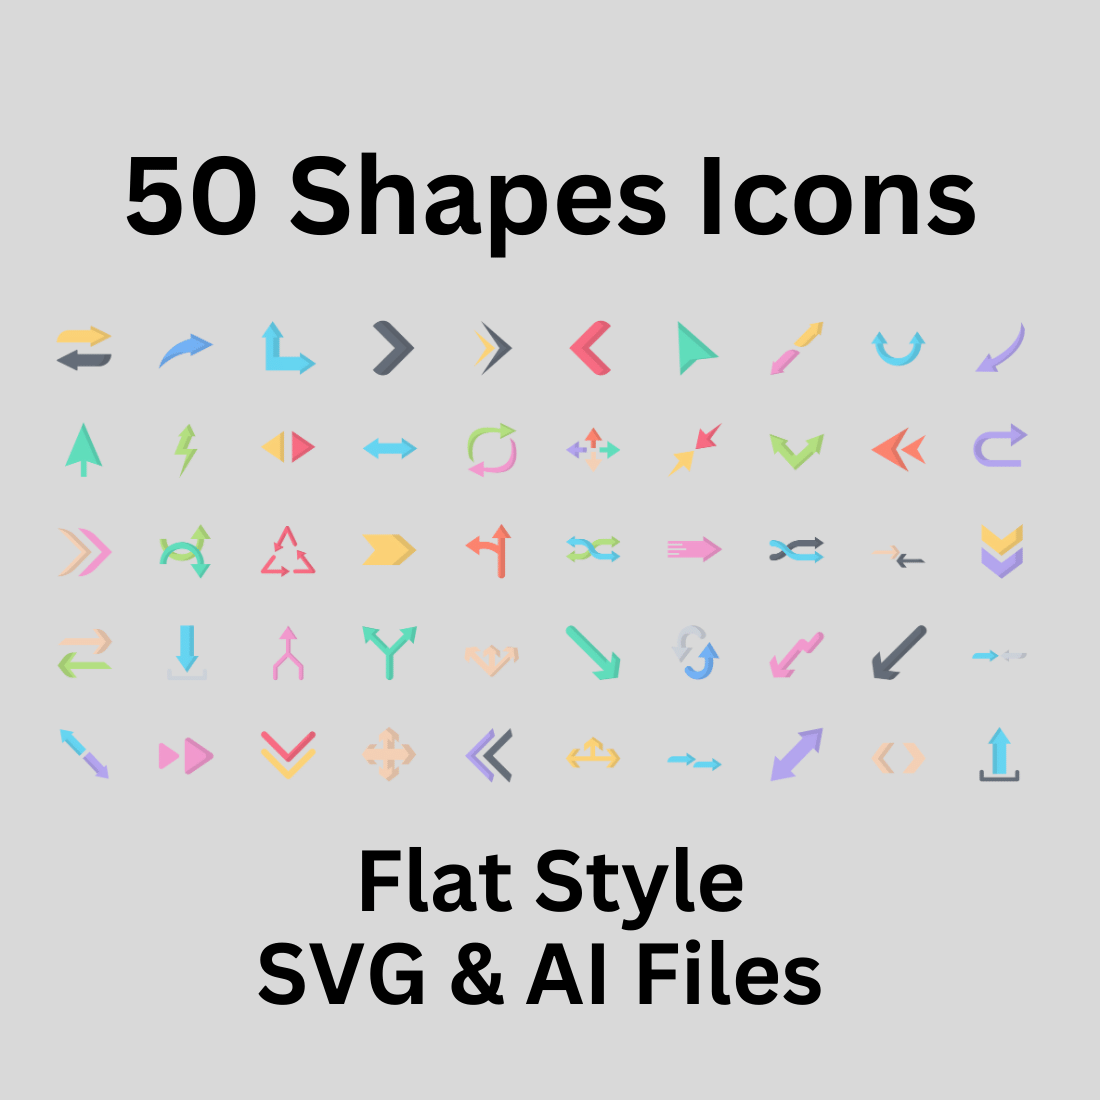 Shapes Icon Set 50 Flat Icons - SVG And AI Files preview image.